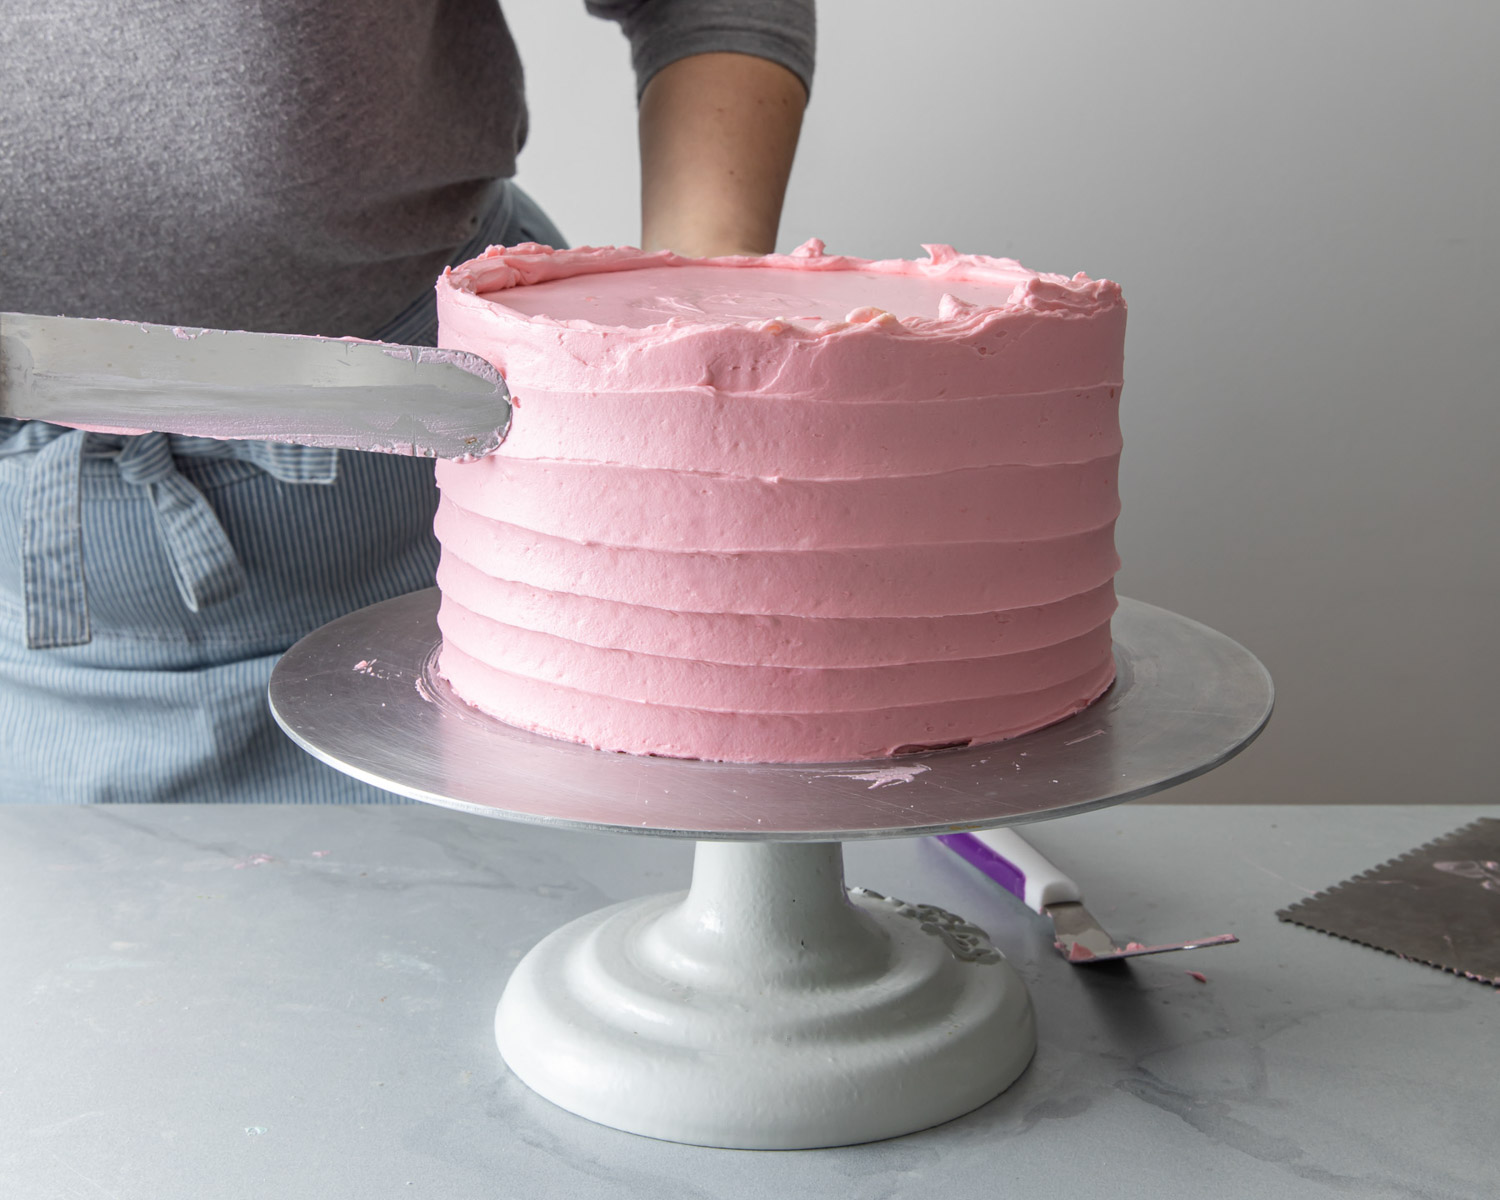 Frosting a pink cake with an offset spatula